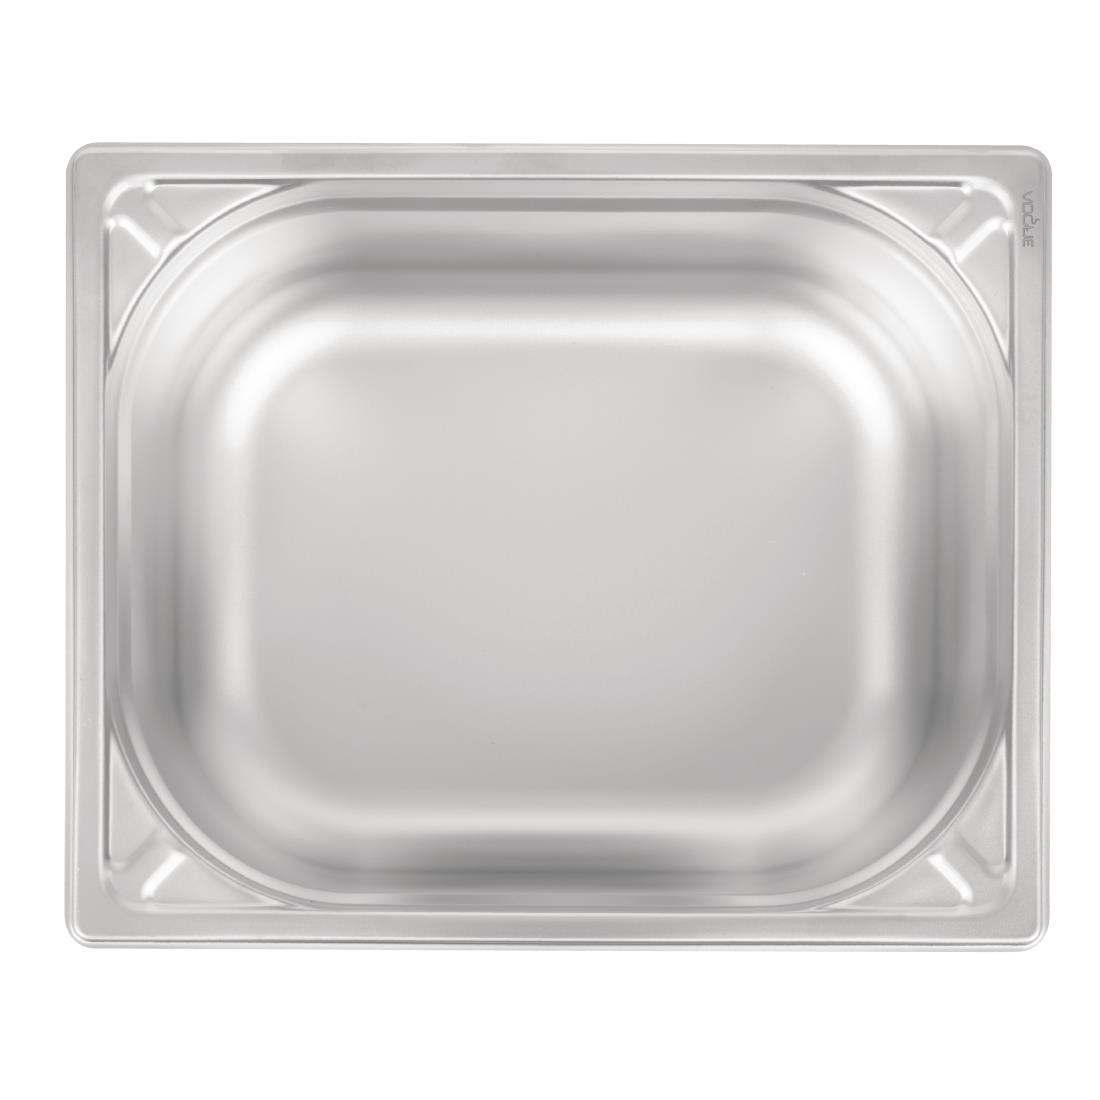 Vogue Heavy Duty Stainless Steel 1/2 Gastronorm Pan 150mm - DW440  - 4